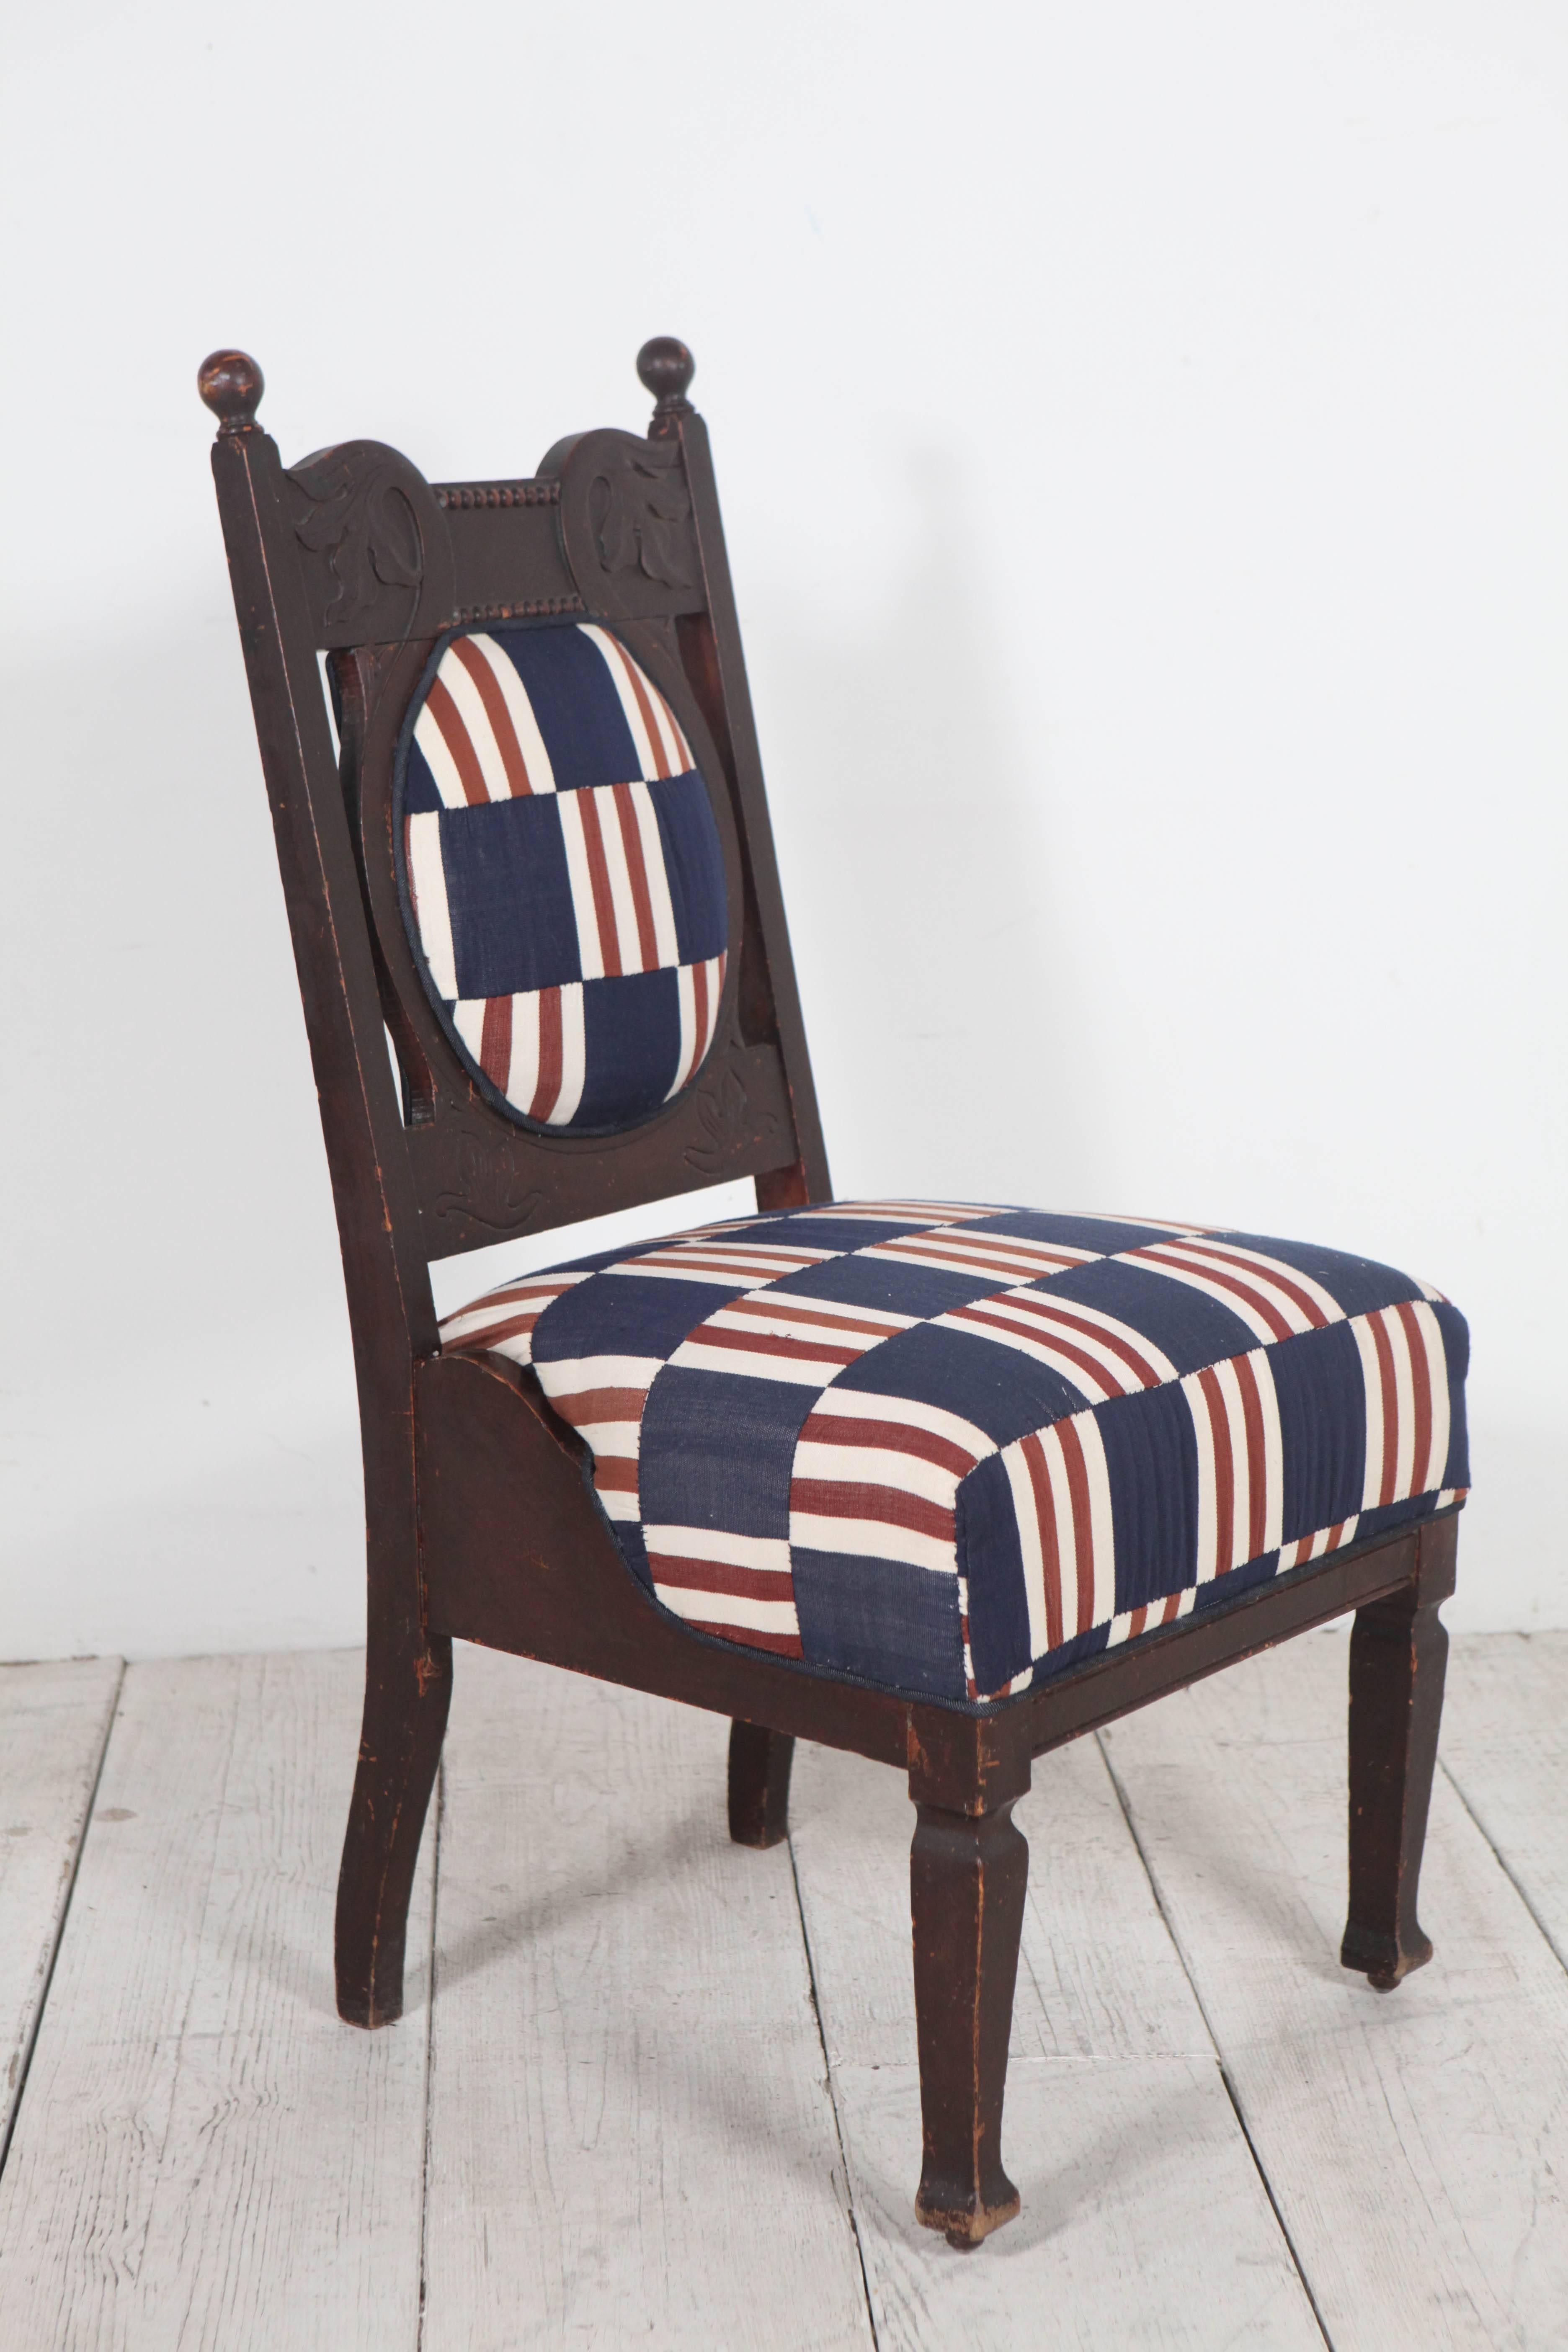 Edwardian Salon Chairs Upholstered in Vintage African Fabric 1